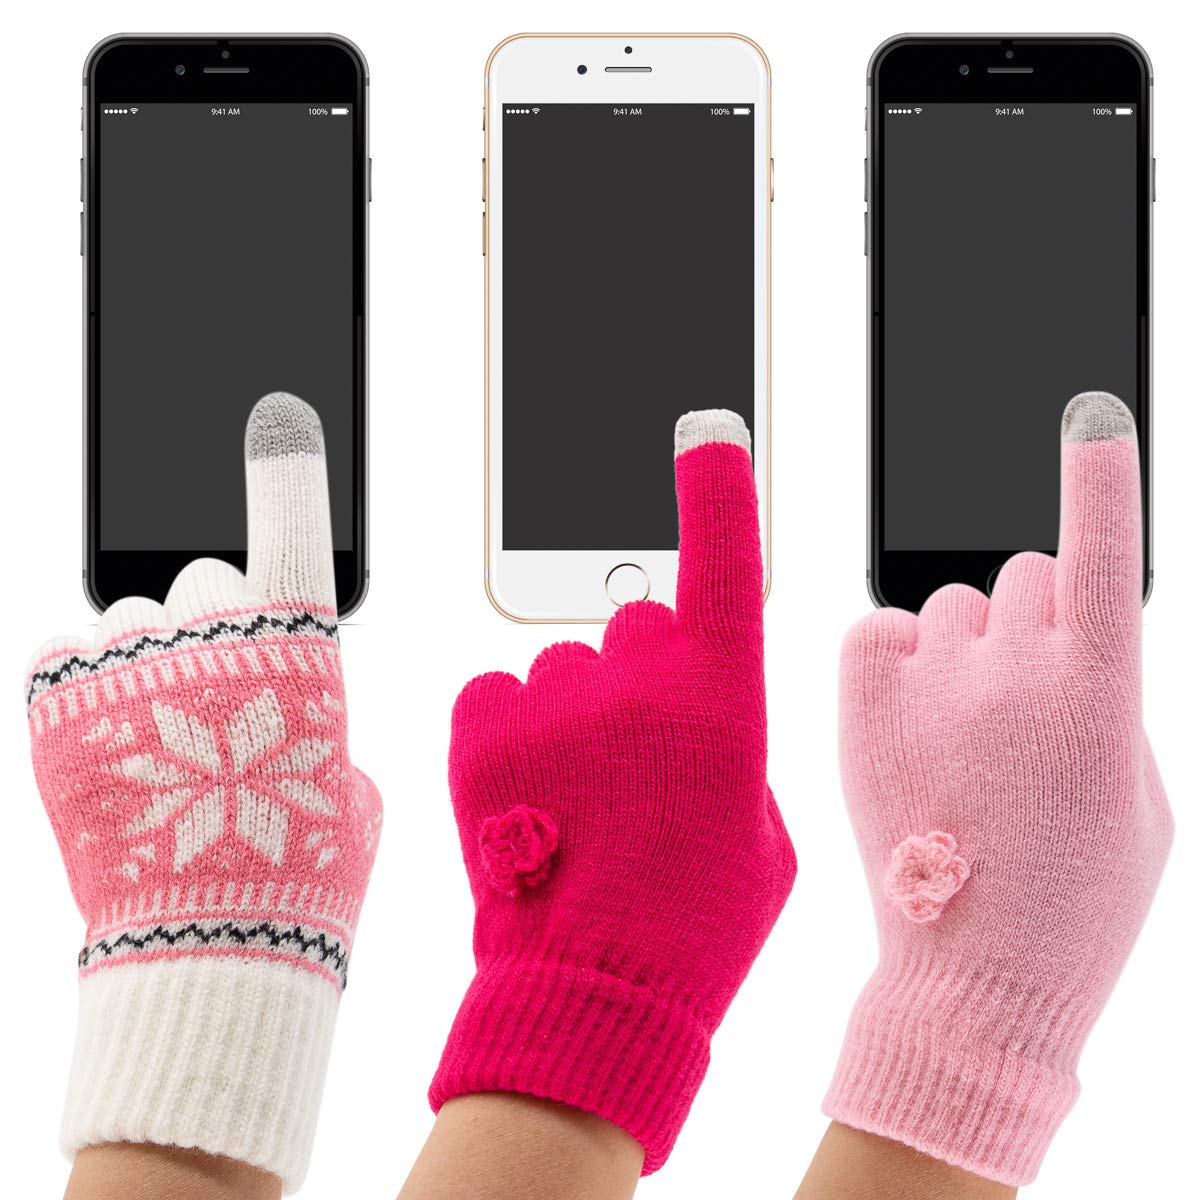 Pugs (5 Pack) Tech Gloves Women Warm Knit Texting Gloves With Touchscreen Fingers Ladies Winter Gloves For Smartphone - Opticdeals